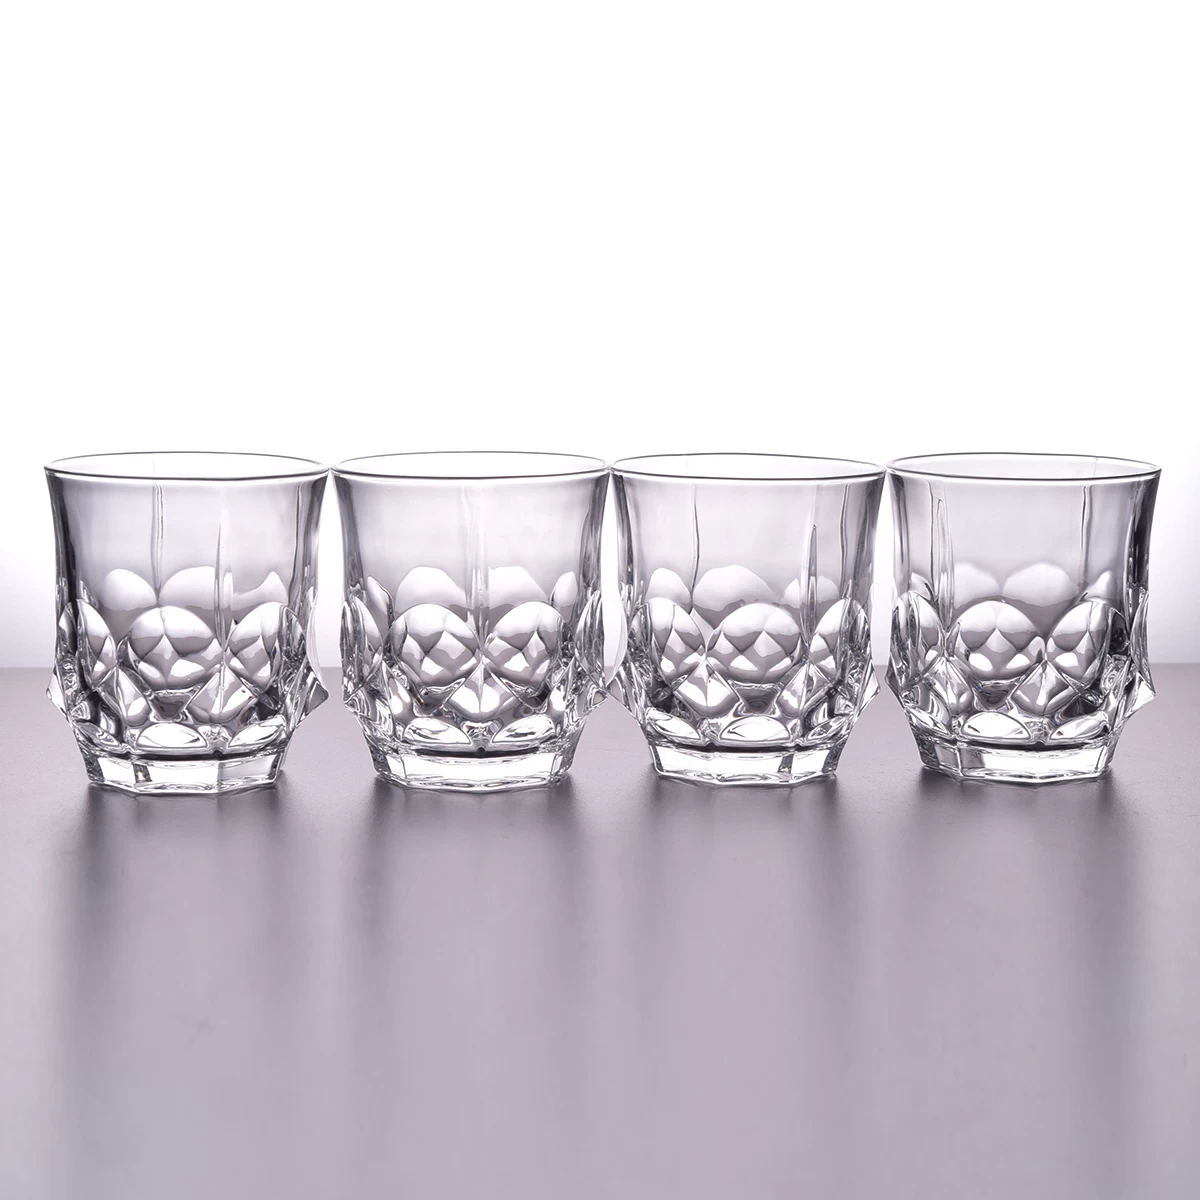 Unique Whiskey Decanter And Glasses Bar Set Wholesale